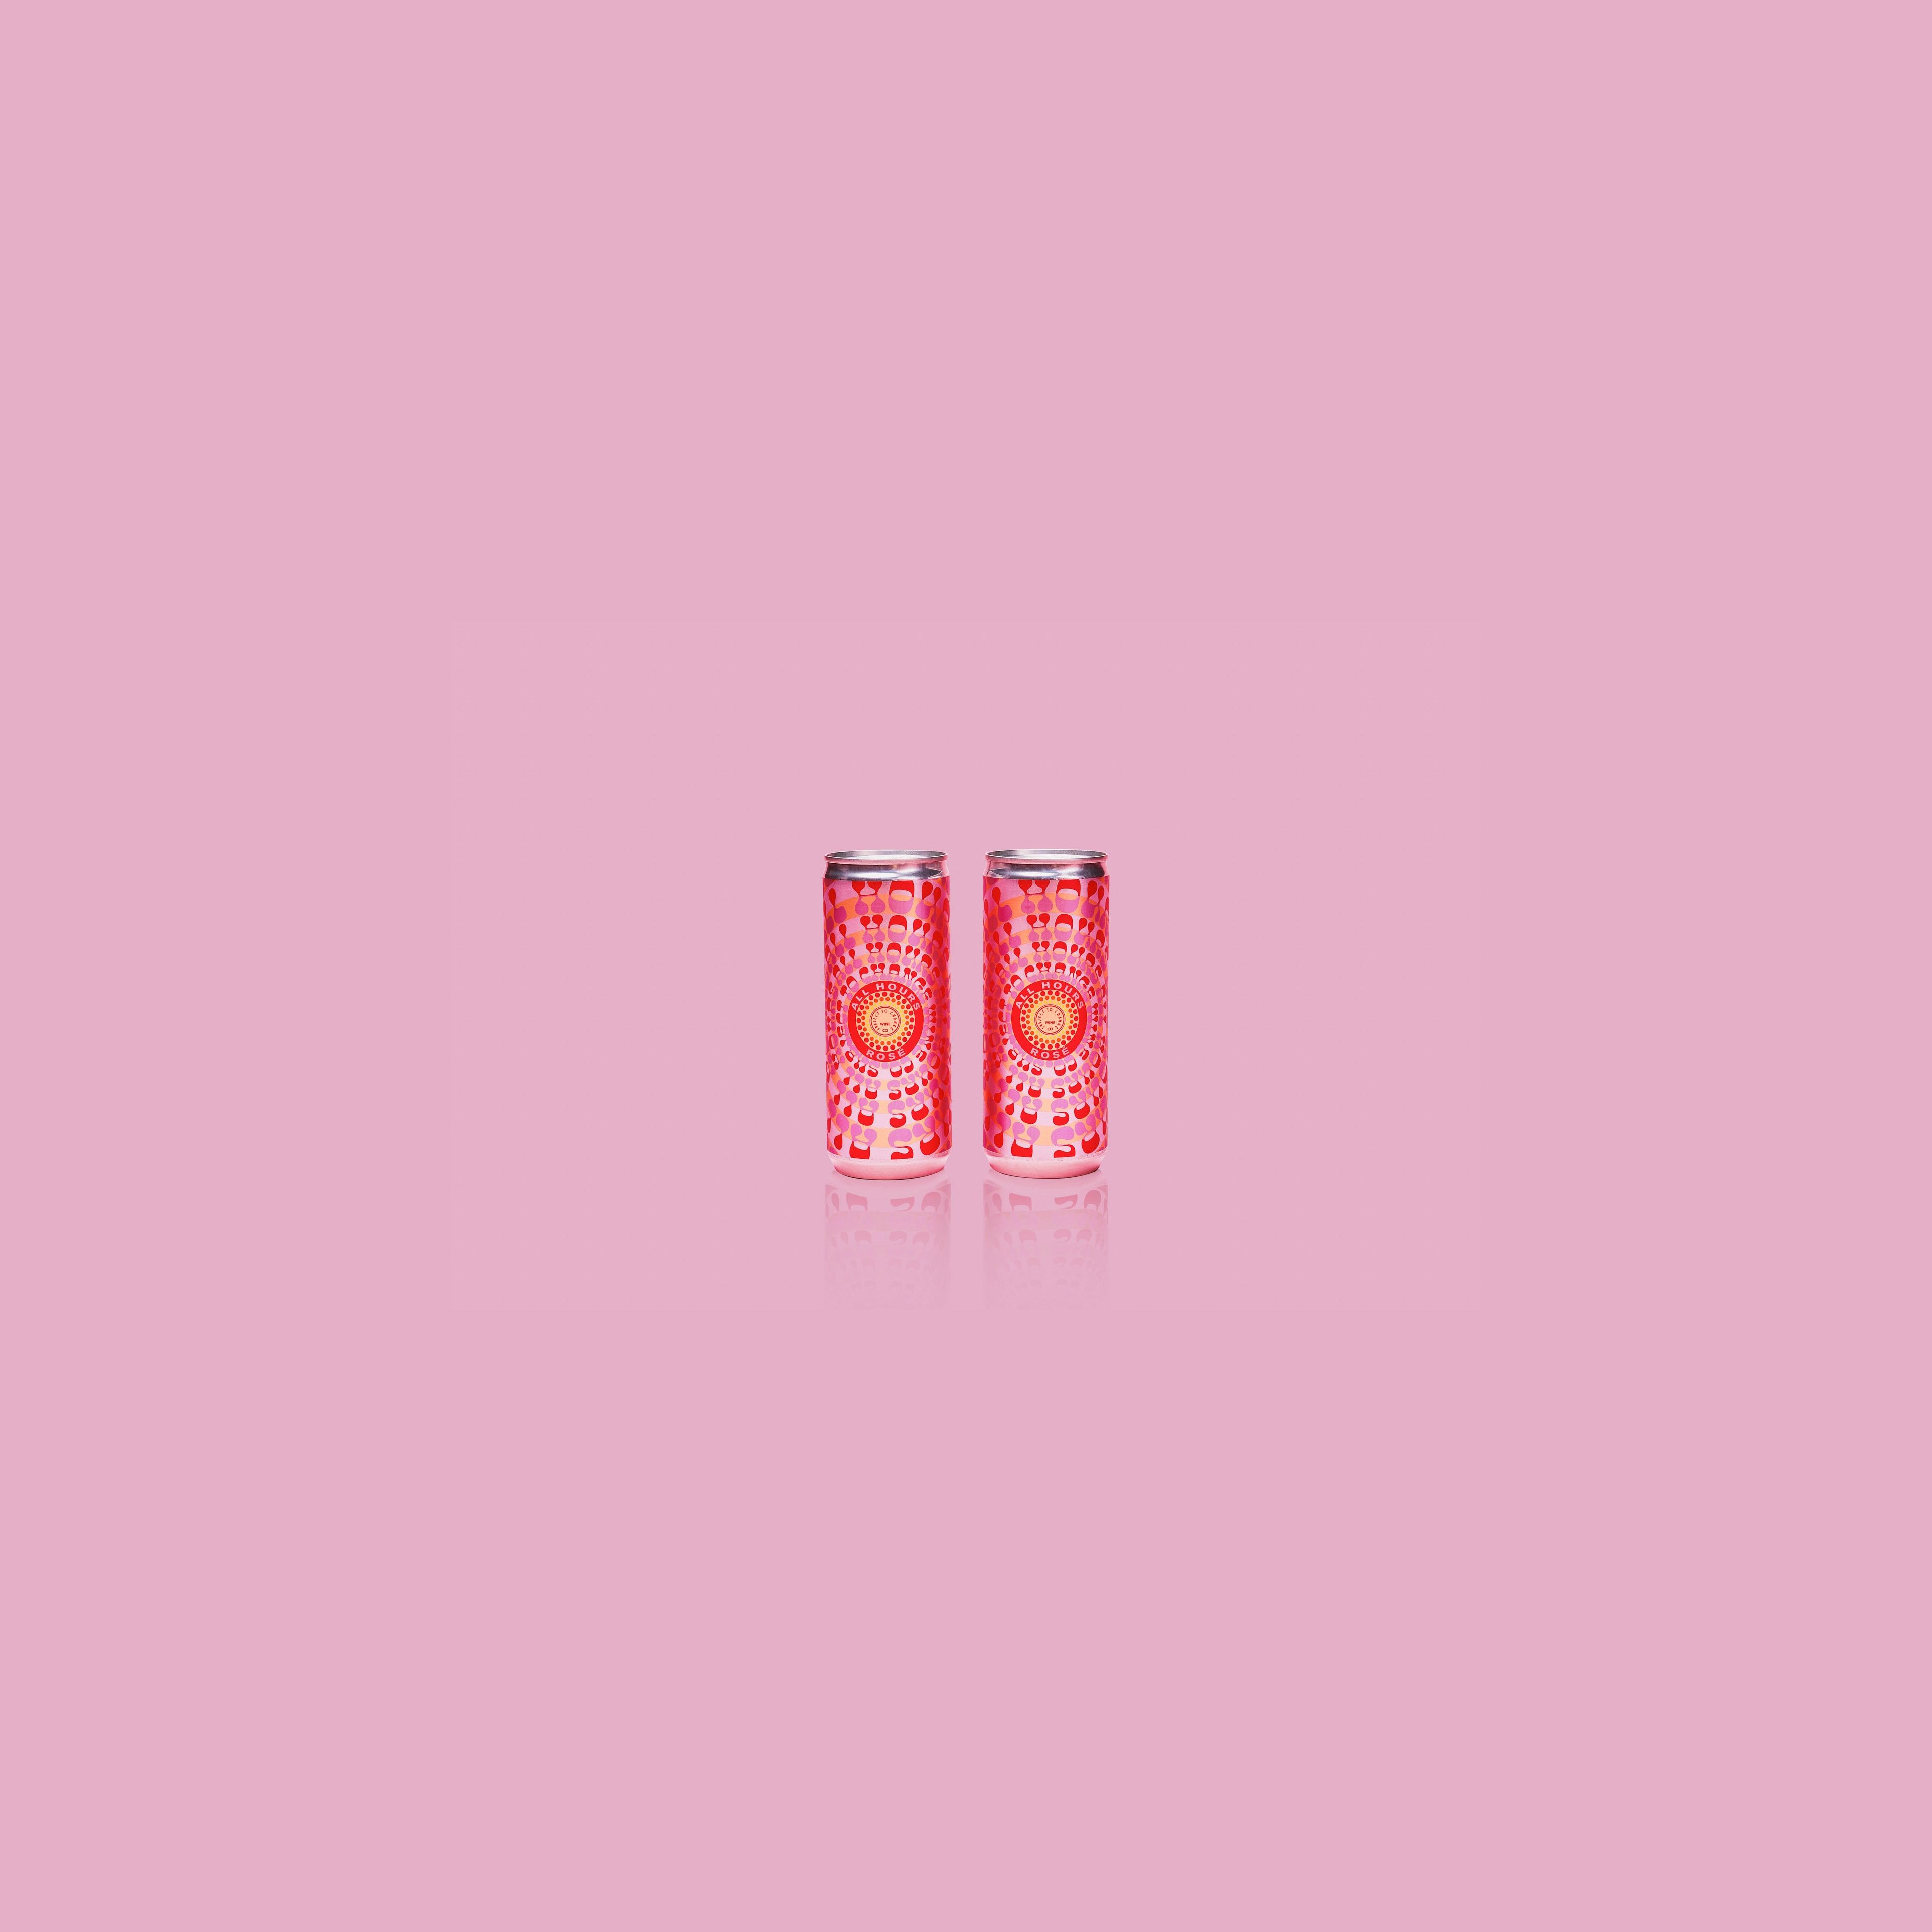 'All Hours' Rosé Cans